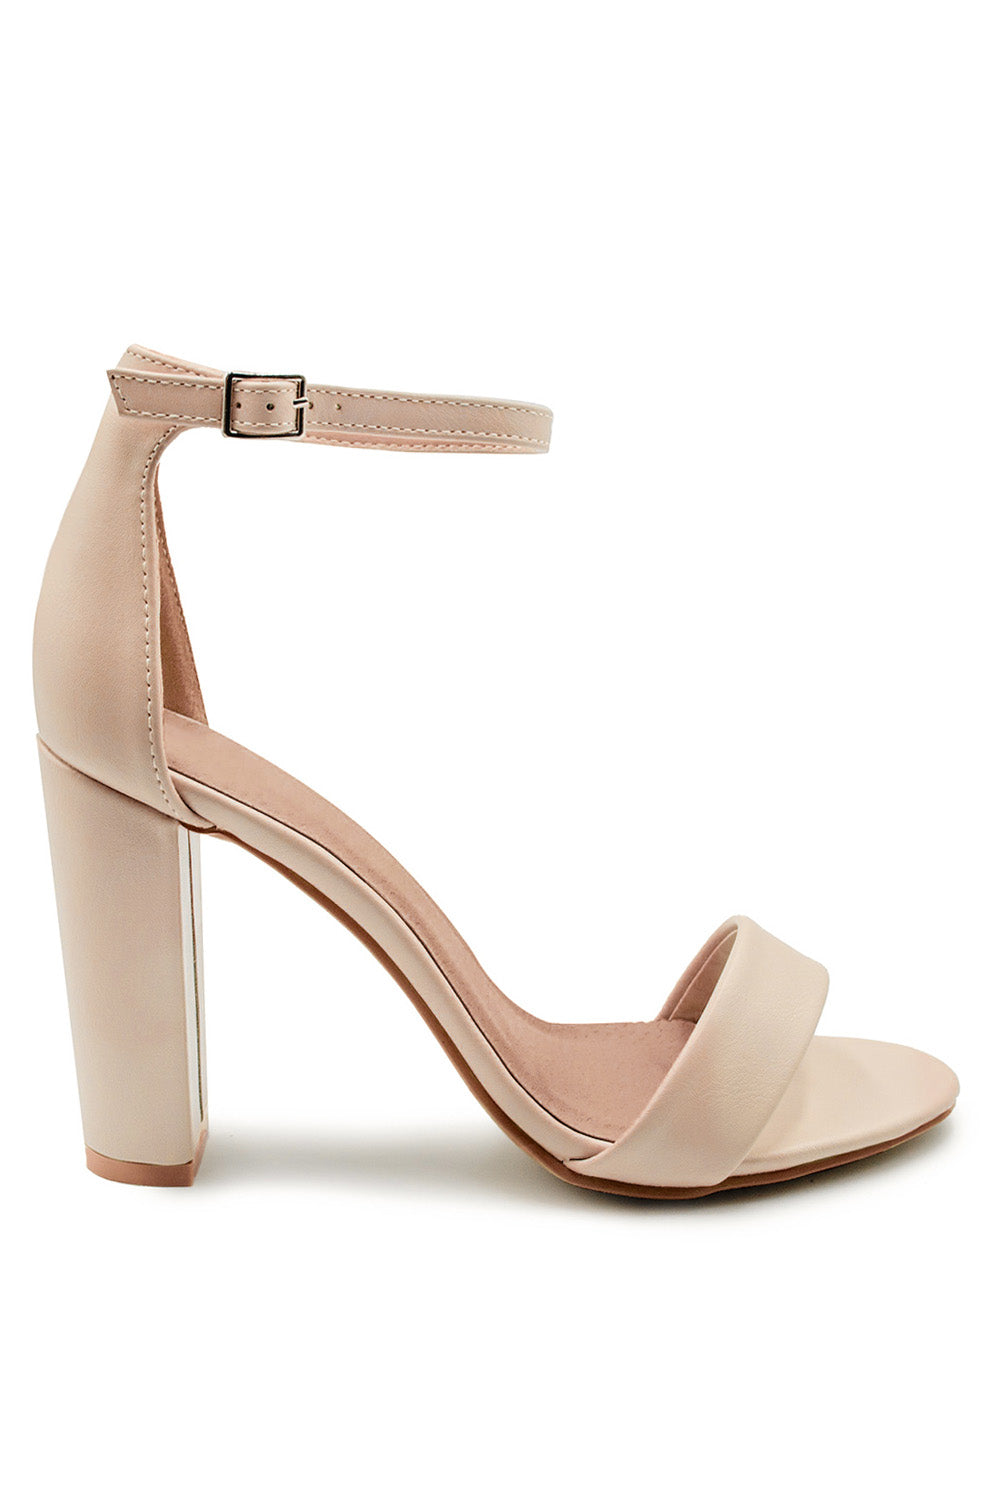 SKYE STRAPPY BLOCK HEELS WITH BUCKLE IN NUDE FAUX LEATHER